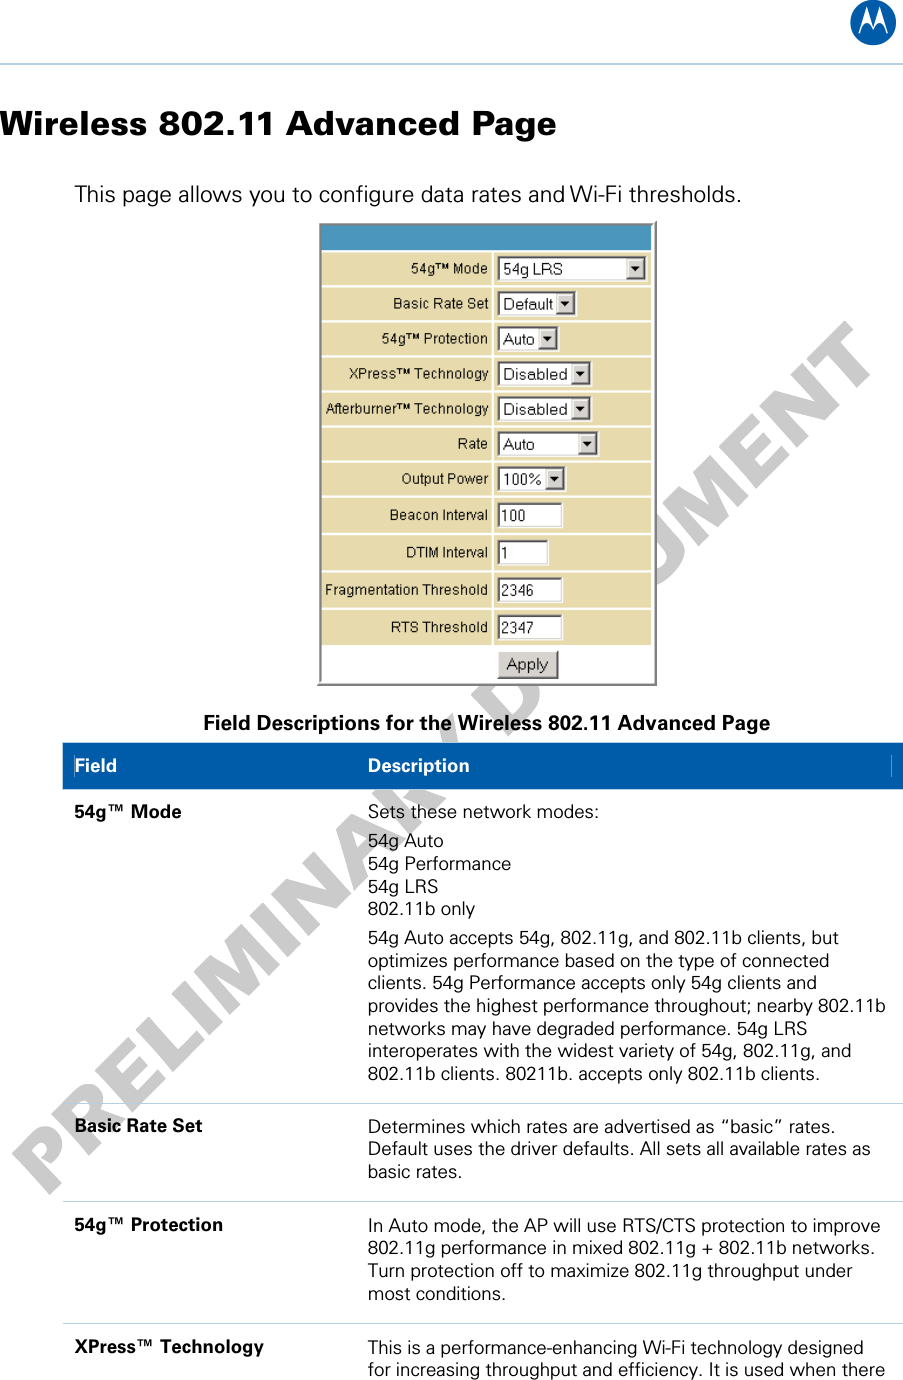 B Wireless 802.11 Advanced Page This page allows you to configure data rates and Wi-Fi thresholds.  Field Descriptions for the Wireless 802.11 Advanced Page Field   Description 54g™ Mode  Sets these network modes:  54g Auto 54g Performance 54g LRS 802.11b only 54g Auto accepts 54g, 802.11g, and 802.11b clients, but optimizes performance based on the type of connected clients. 54g Performance accepts only 54g clients and provides the highest performance throughout; nearby 802.11b networks may have degraded performance. 54g LRS interoperates with the widest variety of 54g, 802.11g, and 802.11b clients. 80211b. accepts only 802.11b clients. Basic Rate Set  Determines which rates are advertised as “basic” rates. Default uses the driver defaults. All sets all available rates as basic rates. 54g™ Protection  In Auto mode, the AP will use RTS/CTS protection to improve 802.11g performance in mixed 802.11g + 802.11b networks. Turn protection off to maximize 802.11g throughput under most conditions. XPress™ Technology  This is a performance-enhancing Wi-Fi technology designed for increasing throughput and efficiency. It is used when there 10 • Wireless Pages 58   